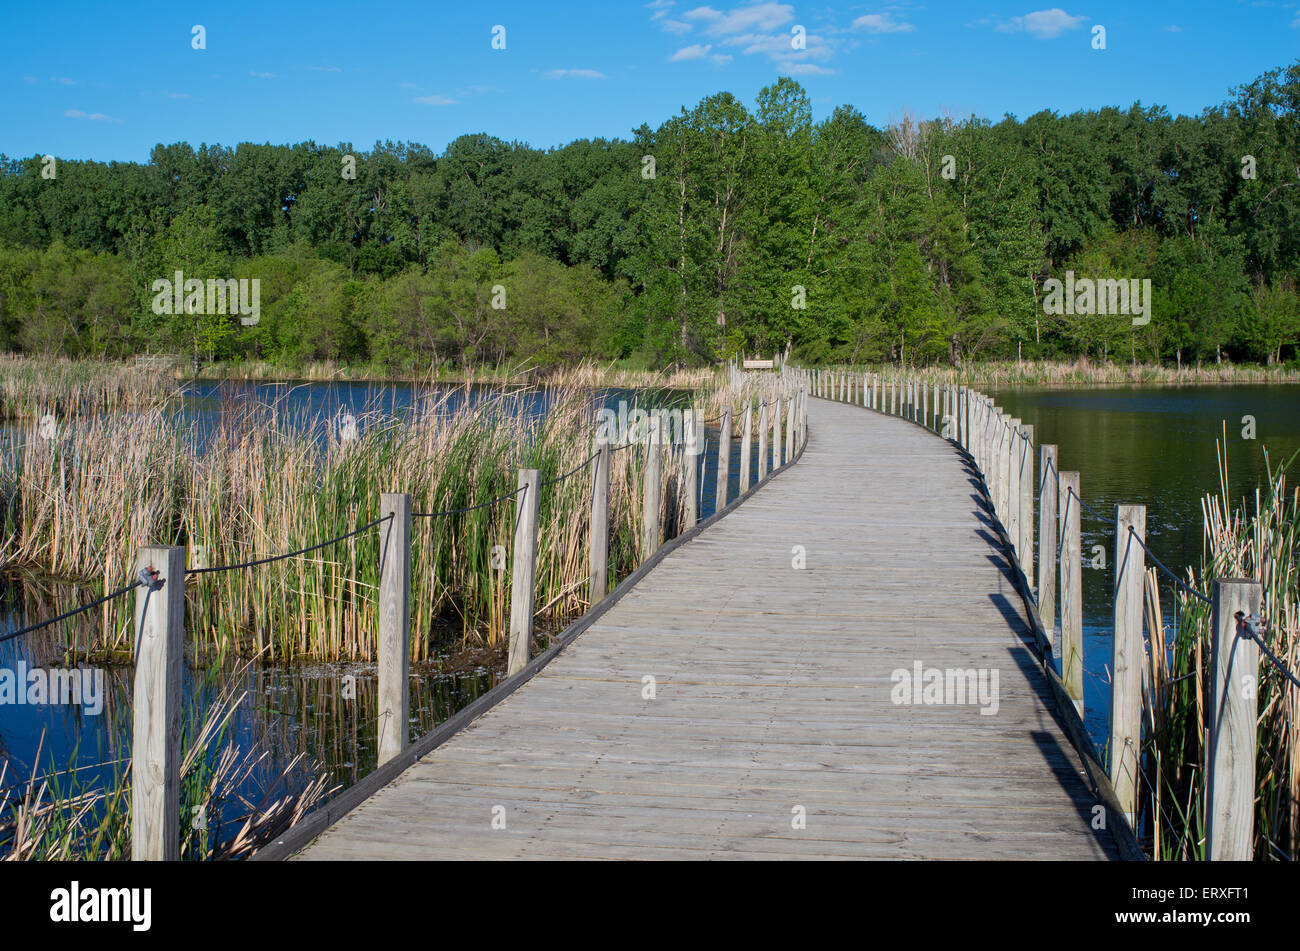 wood lake park boardwalk crossing wetlands and cattail marshes bordered by forest in richfield minnesota Stock Photo